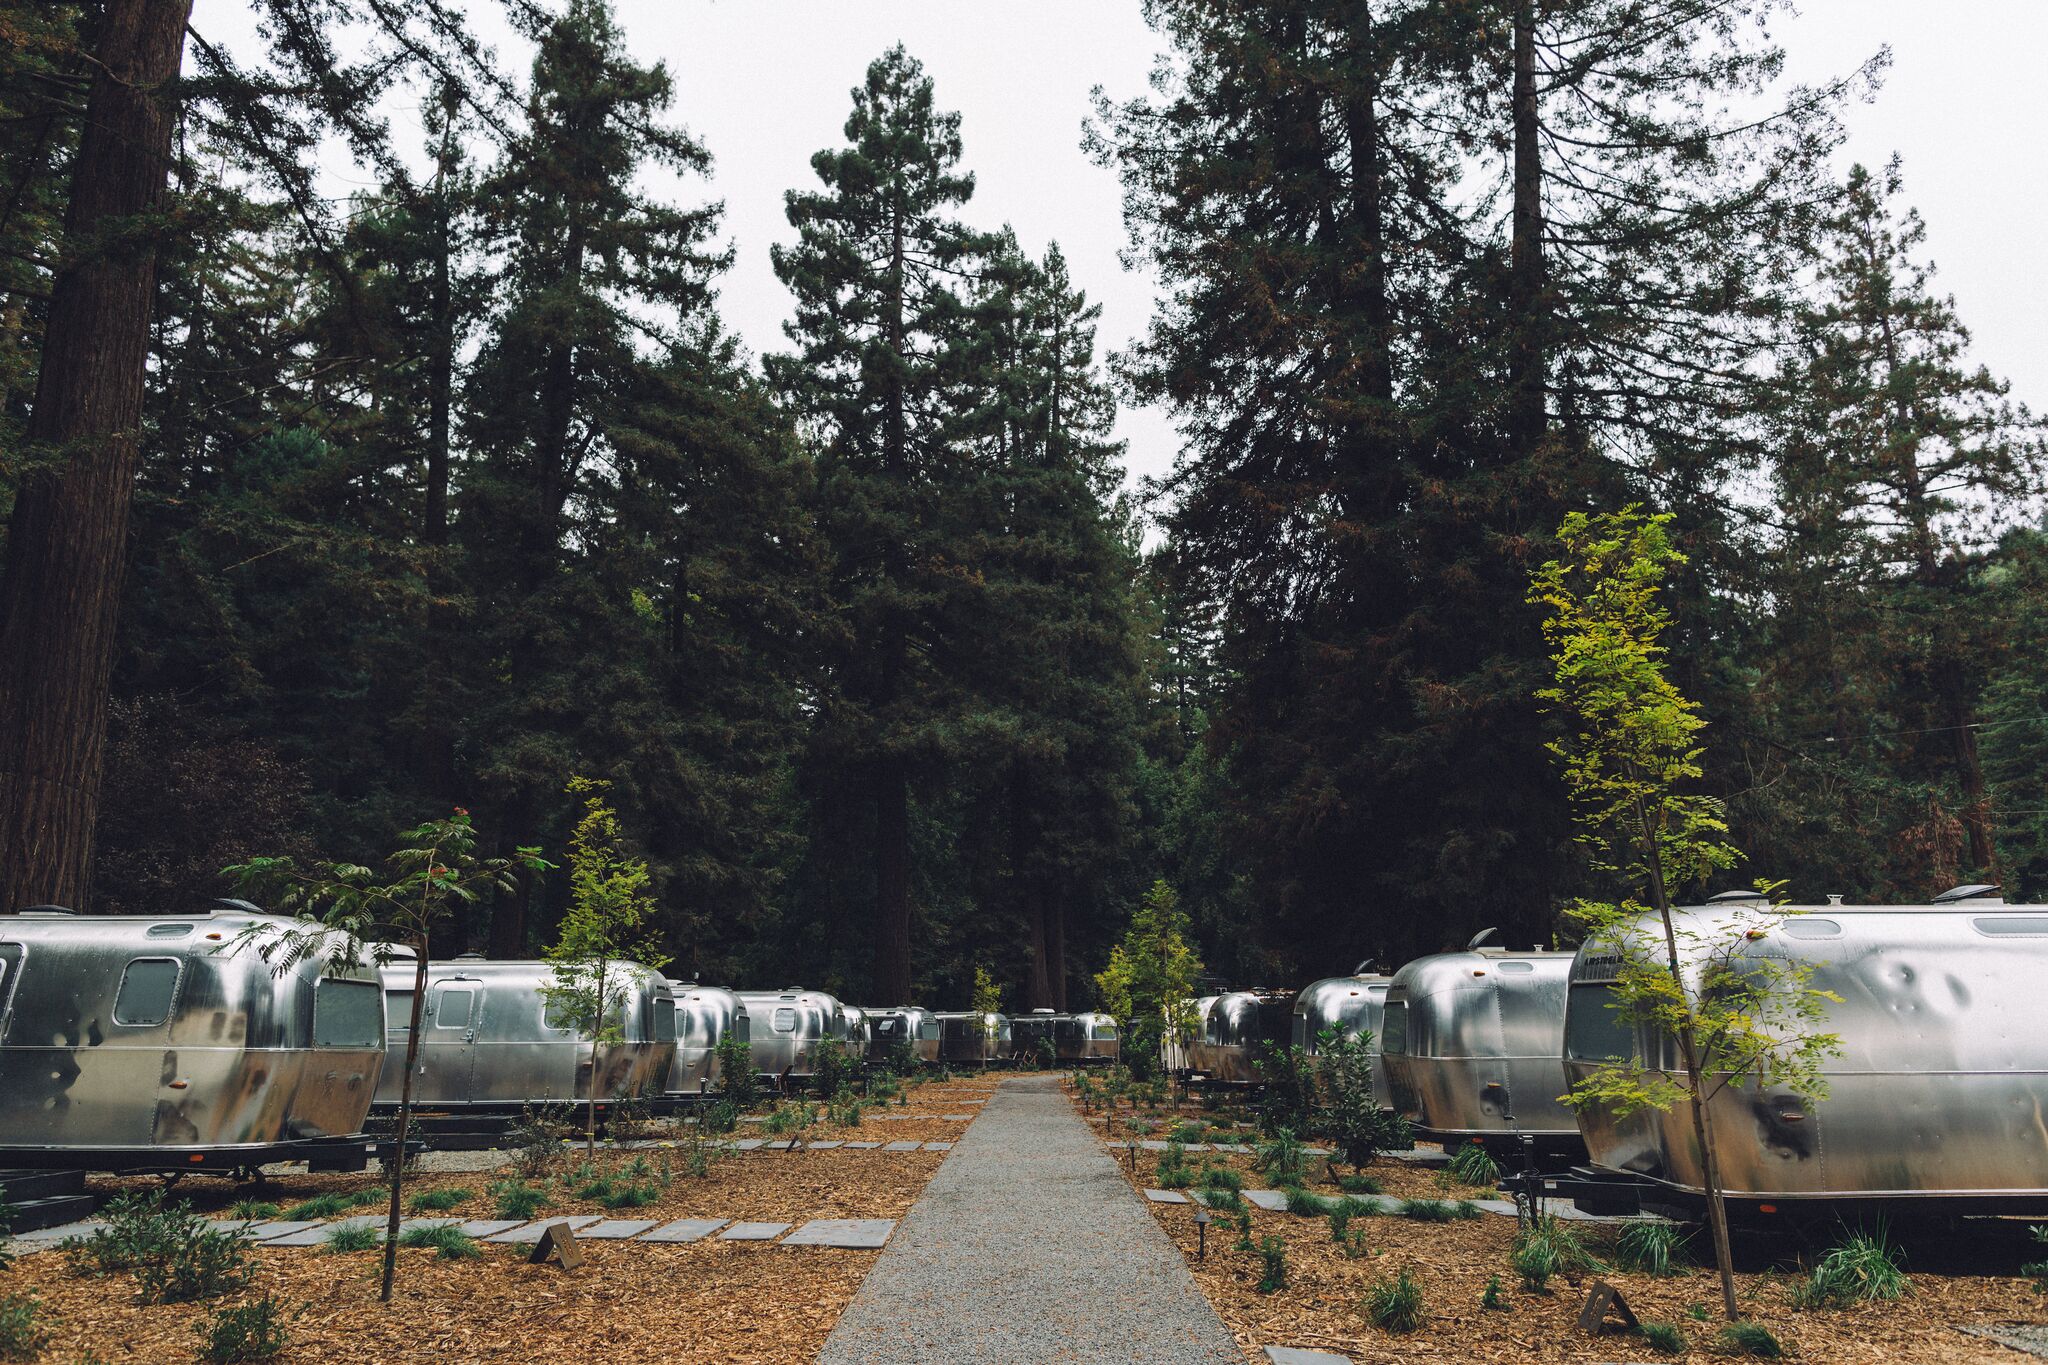 AutoCamp Russian River: The Future of Sustainable High-End Camping